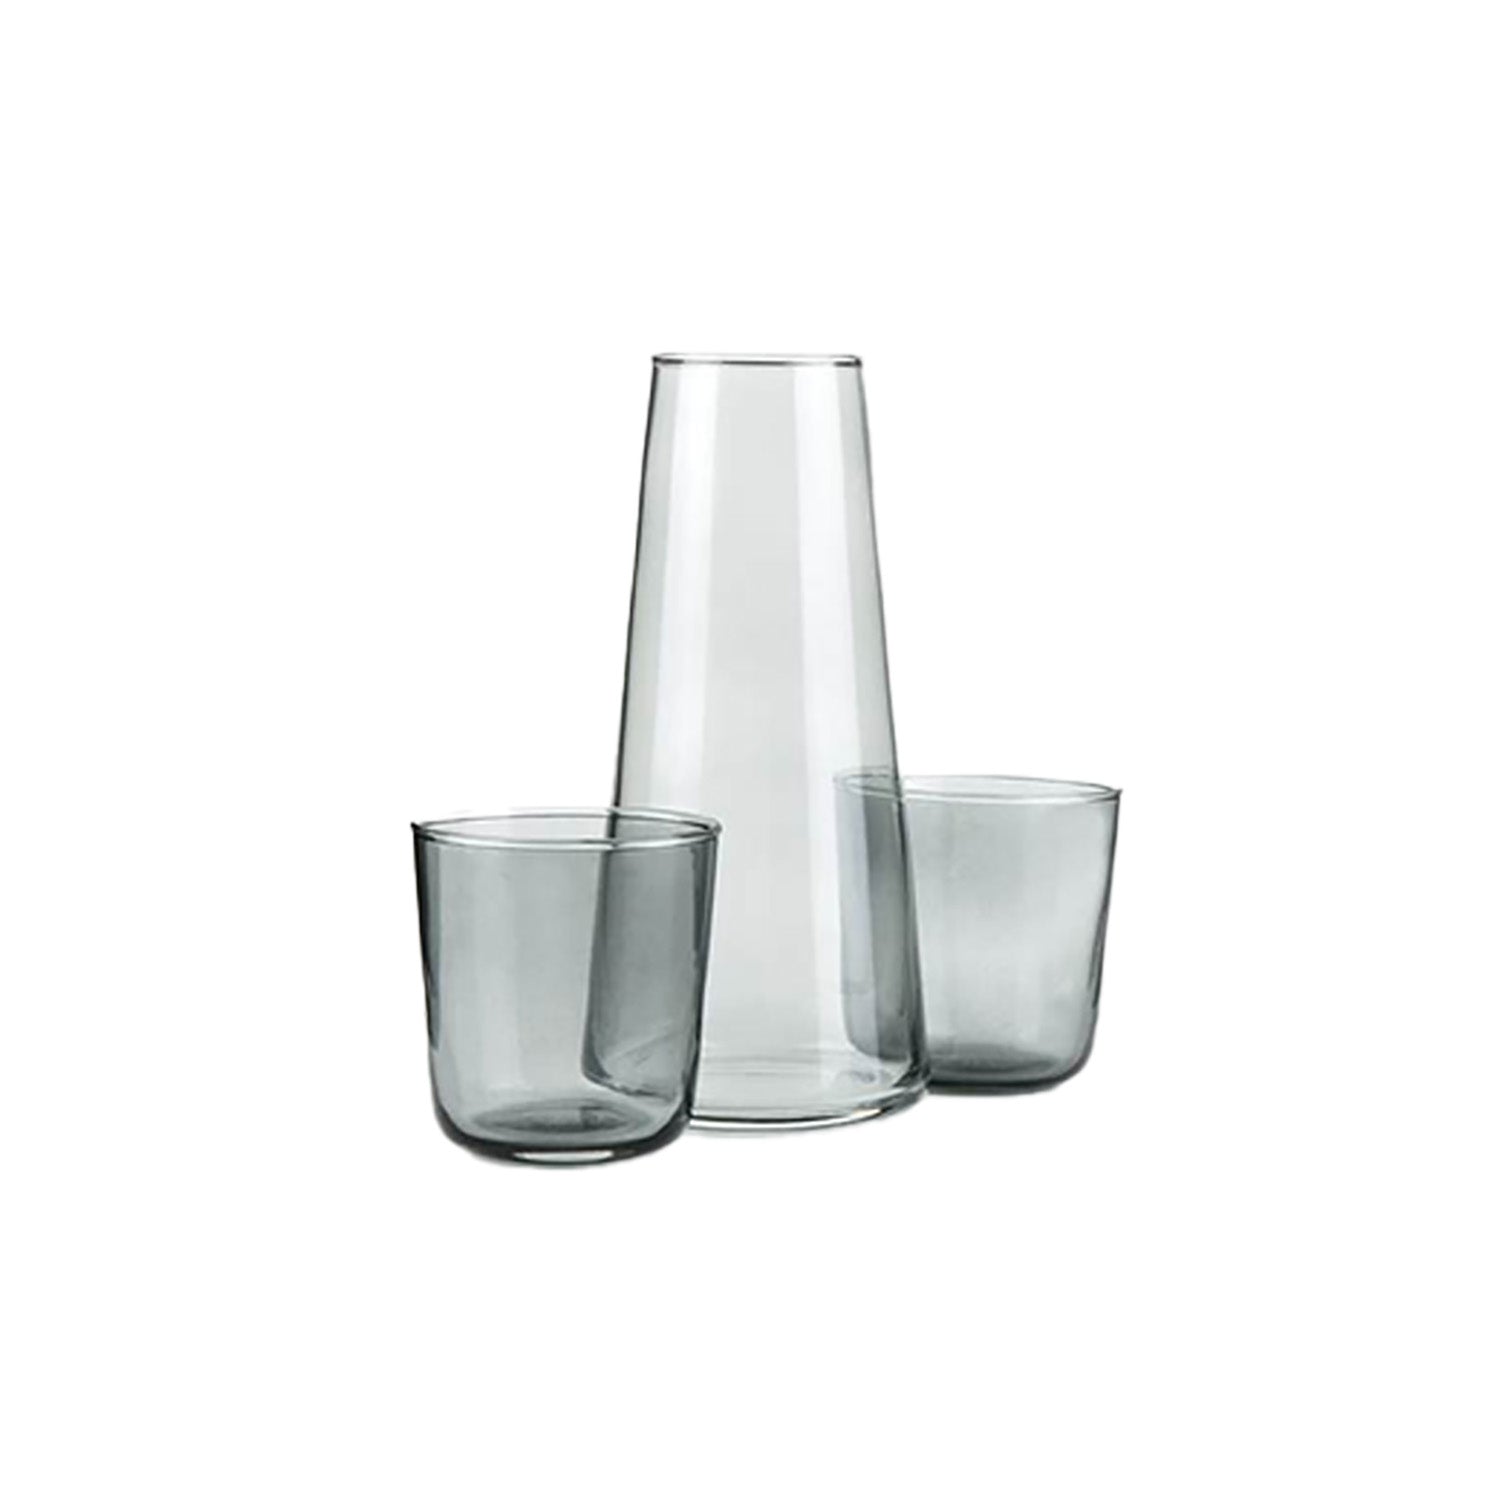 Grayscale Carafe and Glasses set